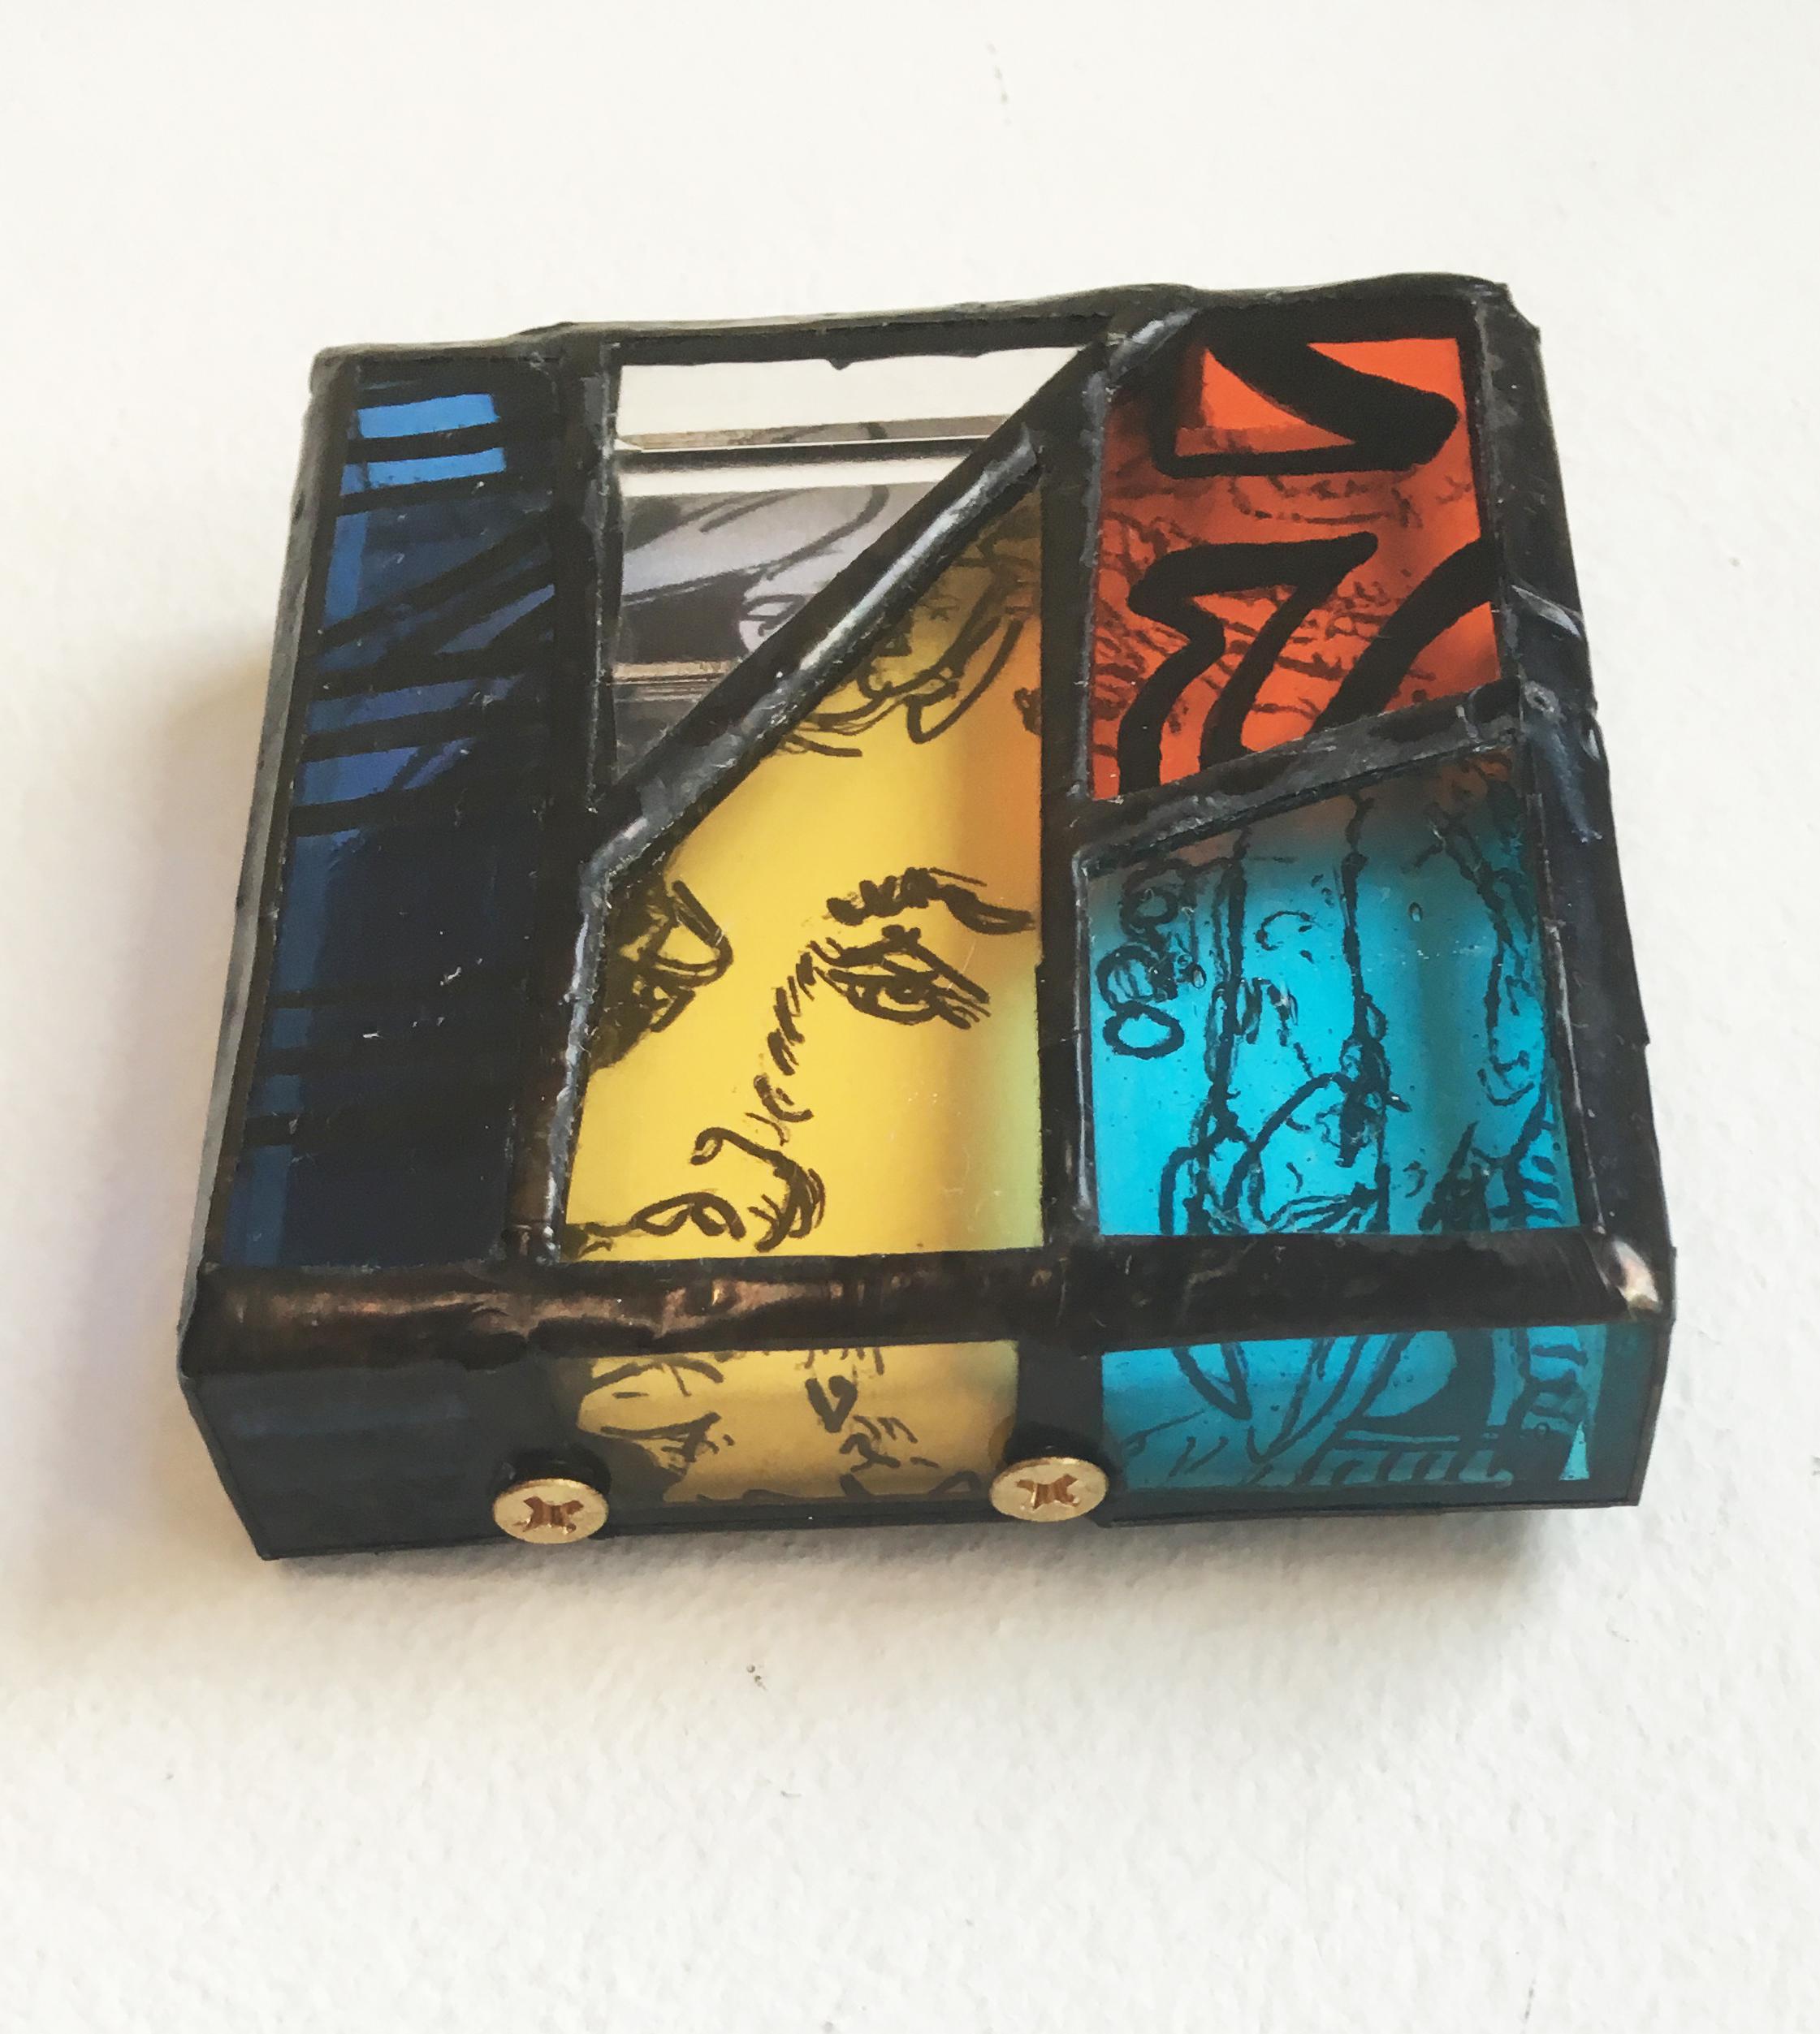 Mr. Tea, a unique stained glass shadowbox handmade by TF Dutchman, contains an ink and paper drawing on canvas set in a stained glass box.  The canvas is a portrait of a musician. The brilliant red, blue, turquoise, and yellow glass with vitreous